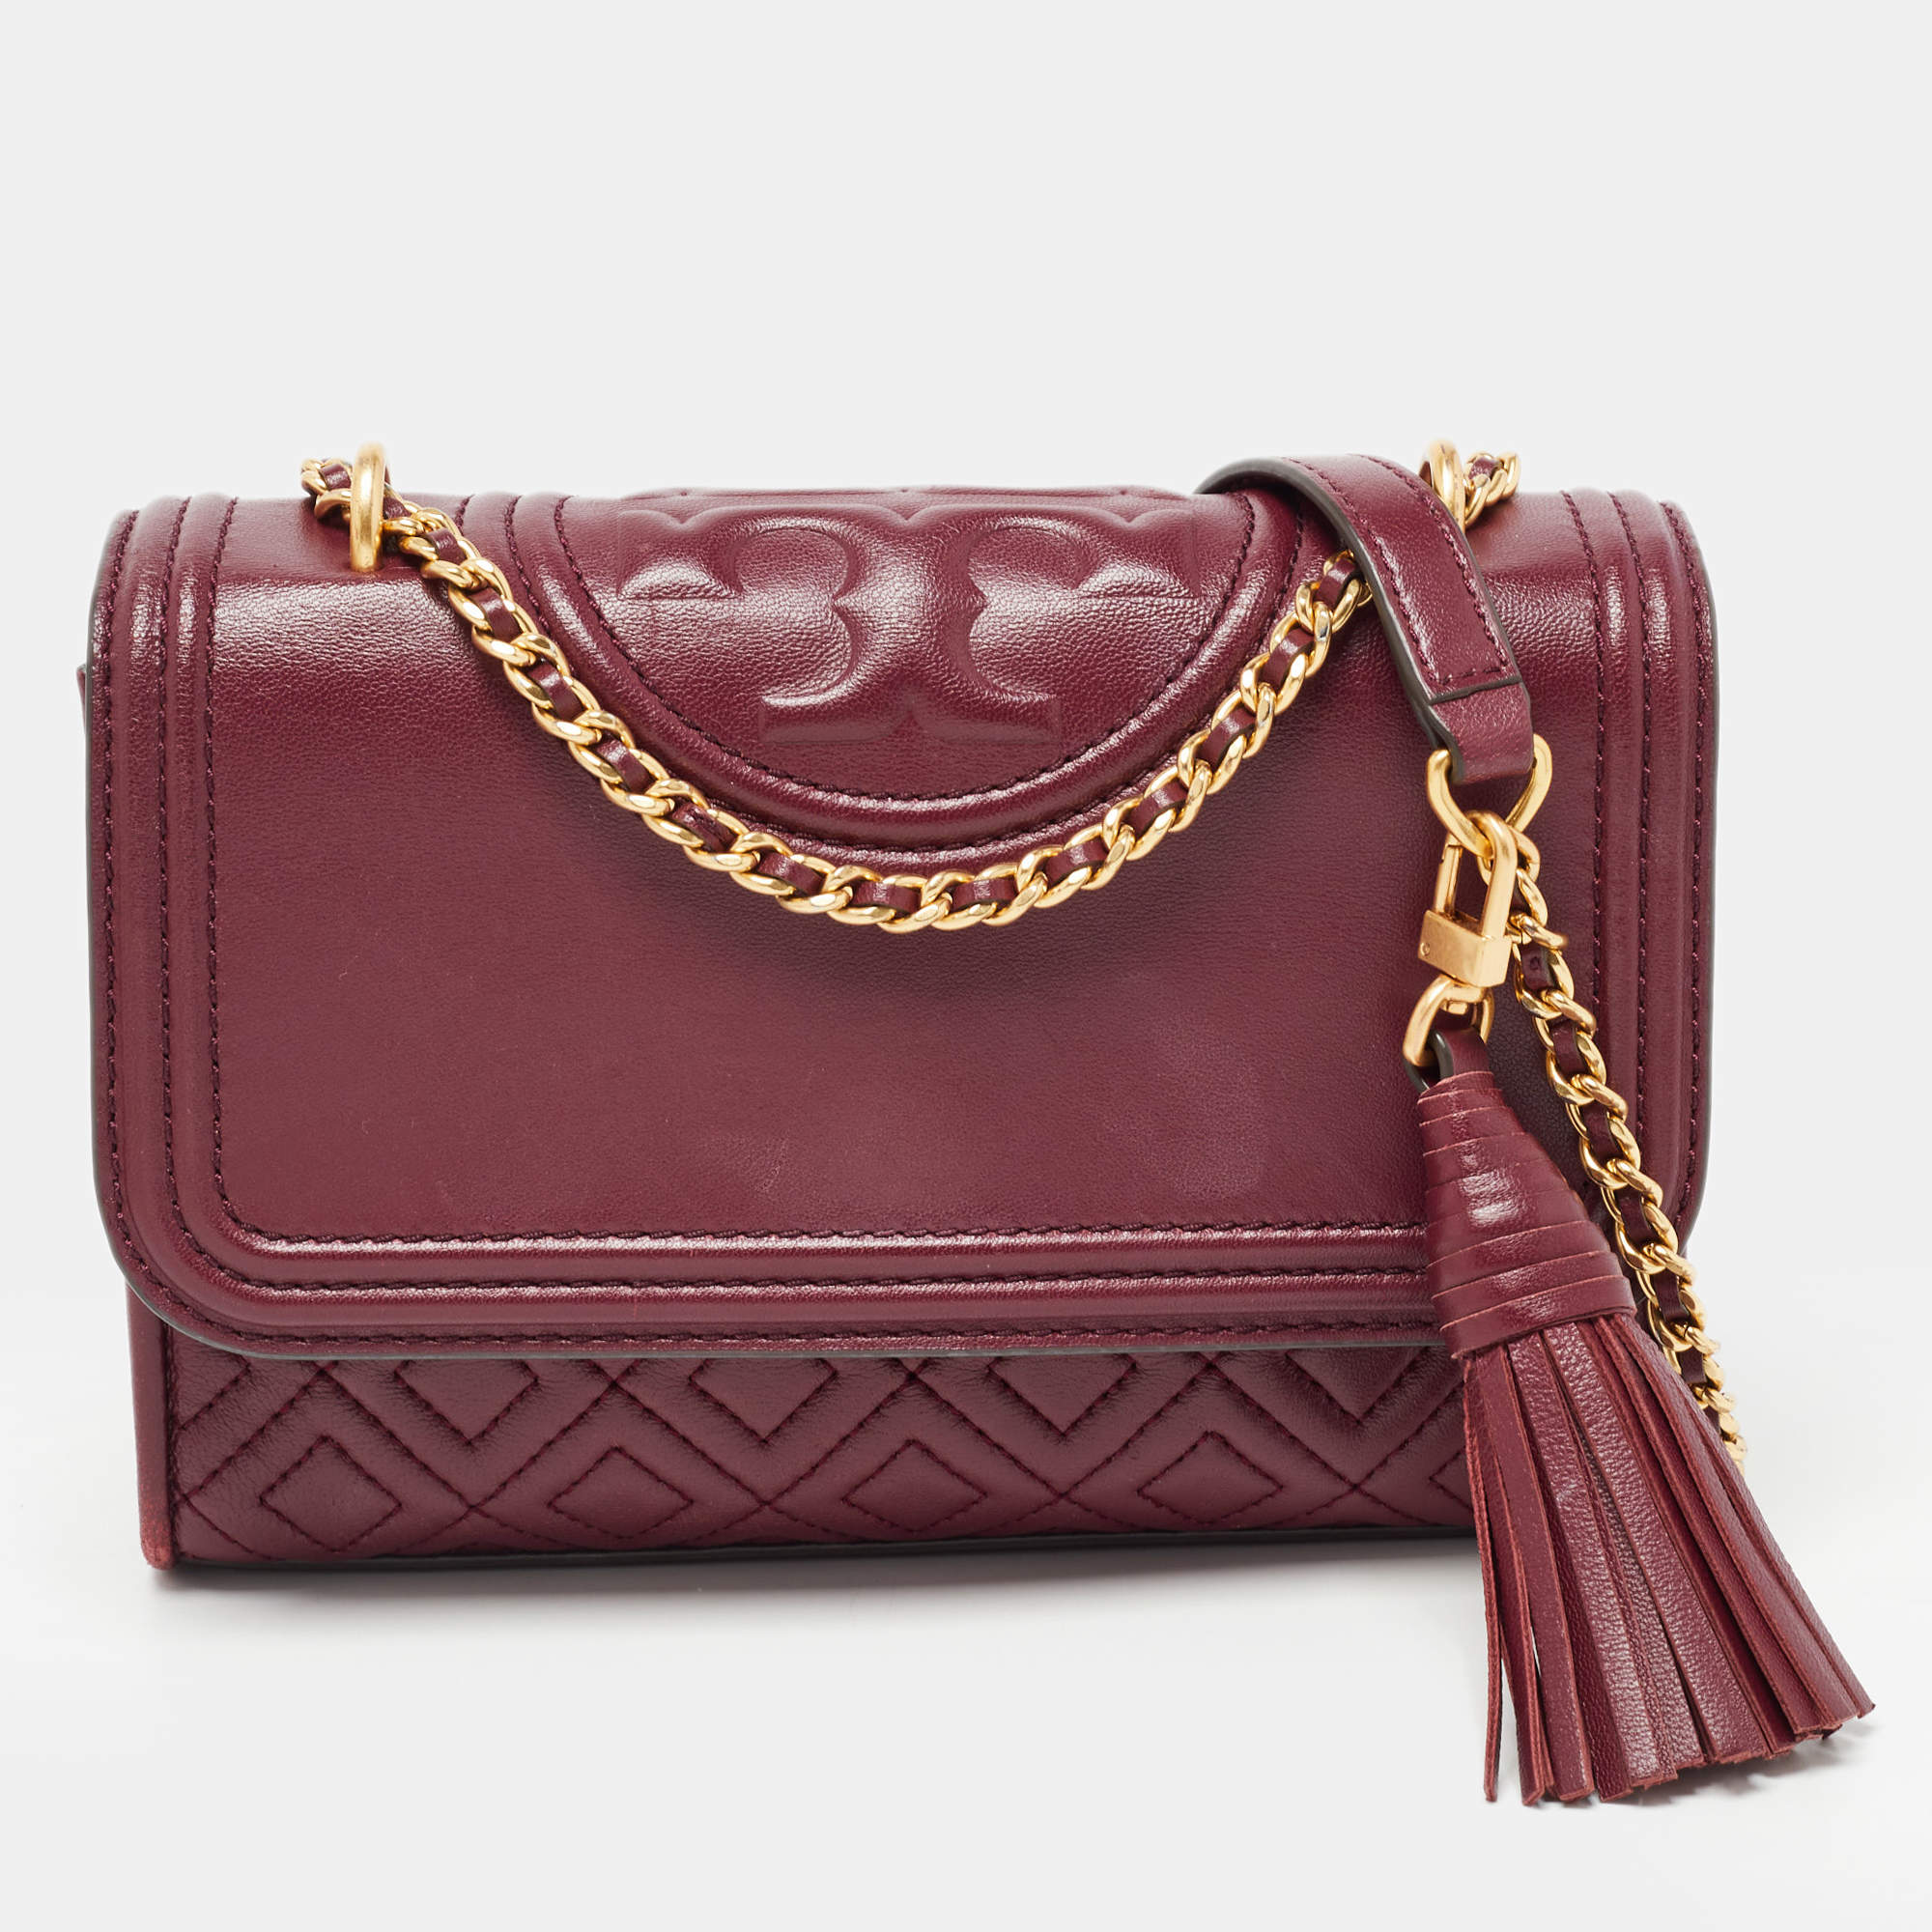 Tory Burch Burgundy Leather Small Fleming Shoulder Bag Tory Burch | The ...